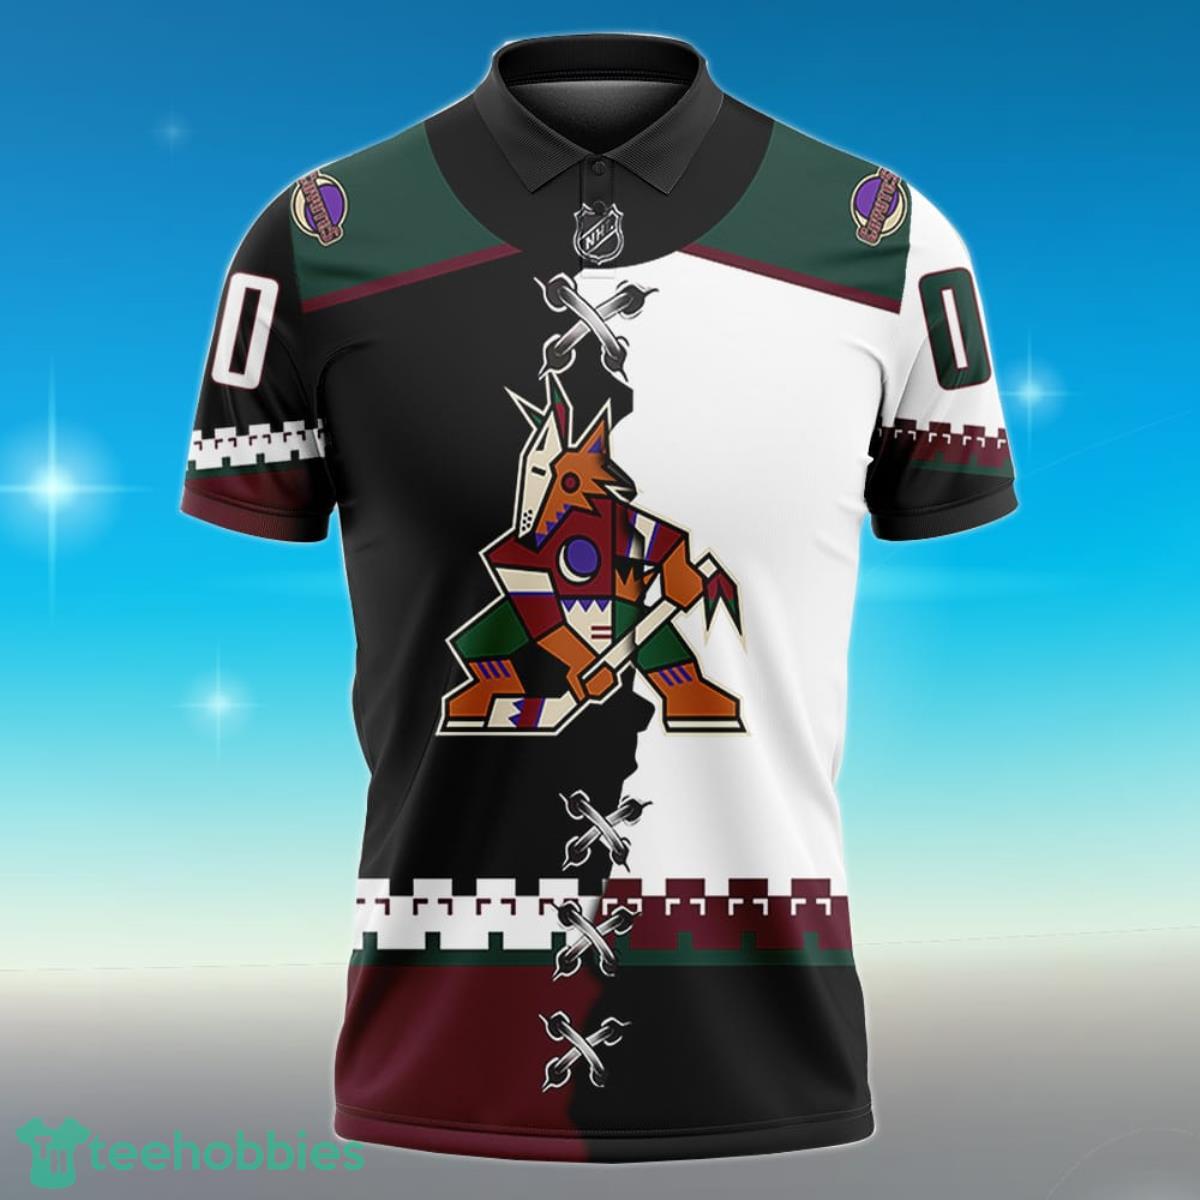 Name Polo Mix Jersey Arizona For Fans Gift Coyotes Personalized NHL Shirt Best